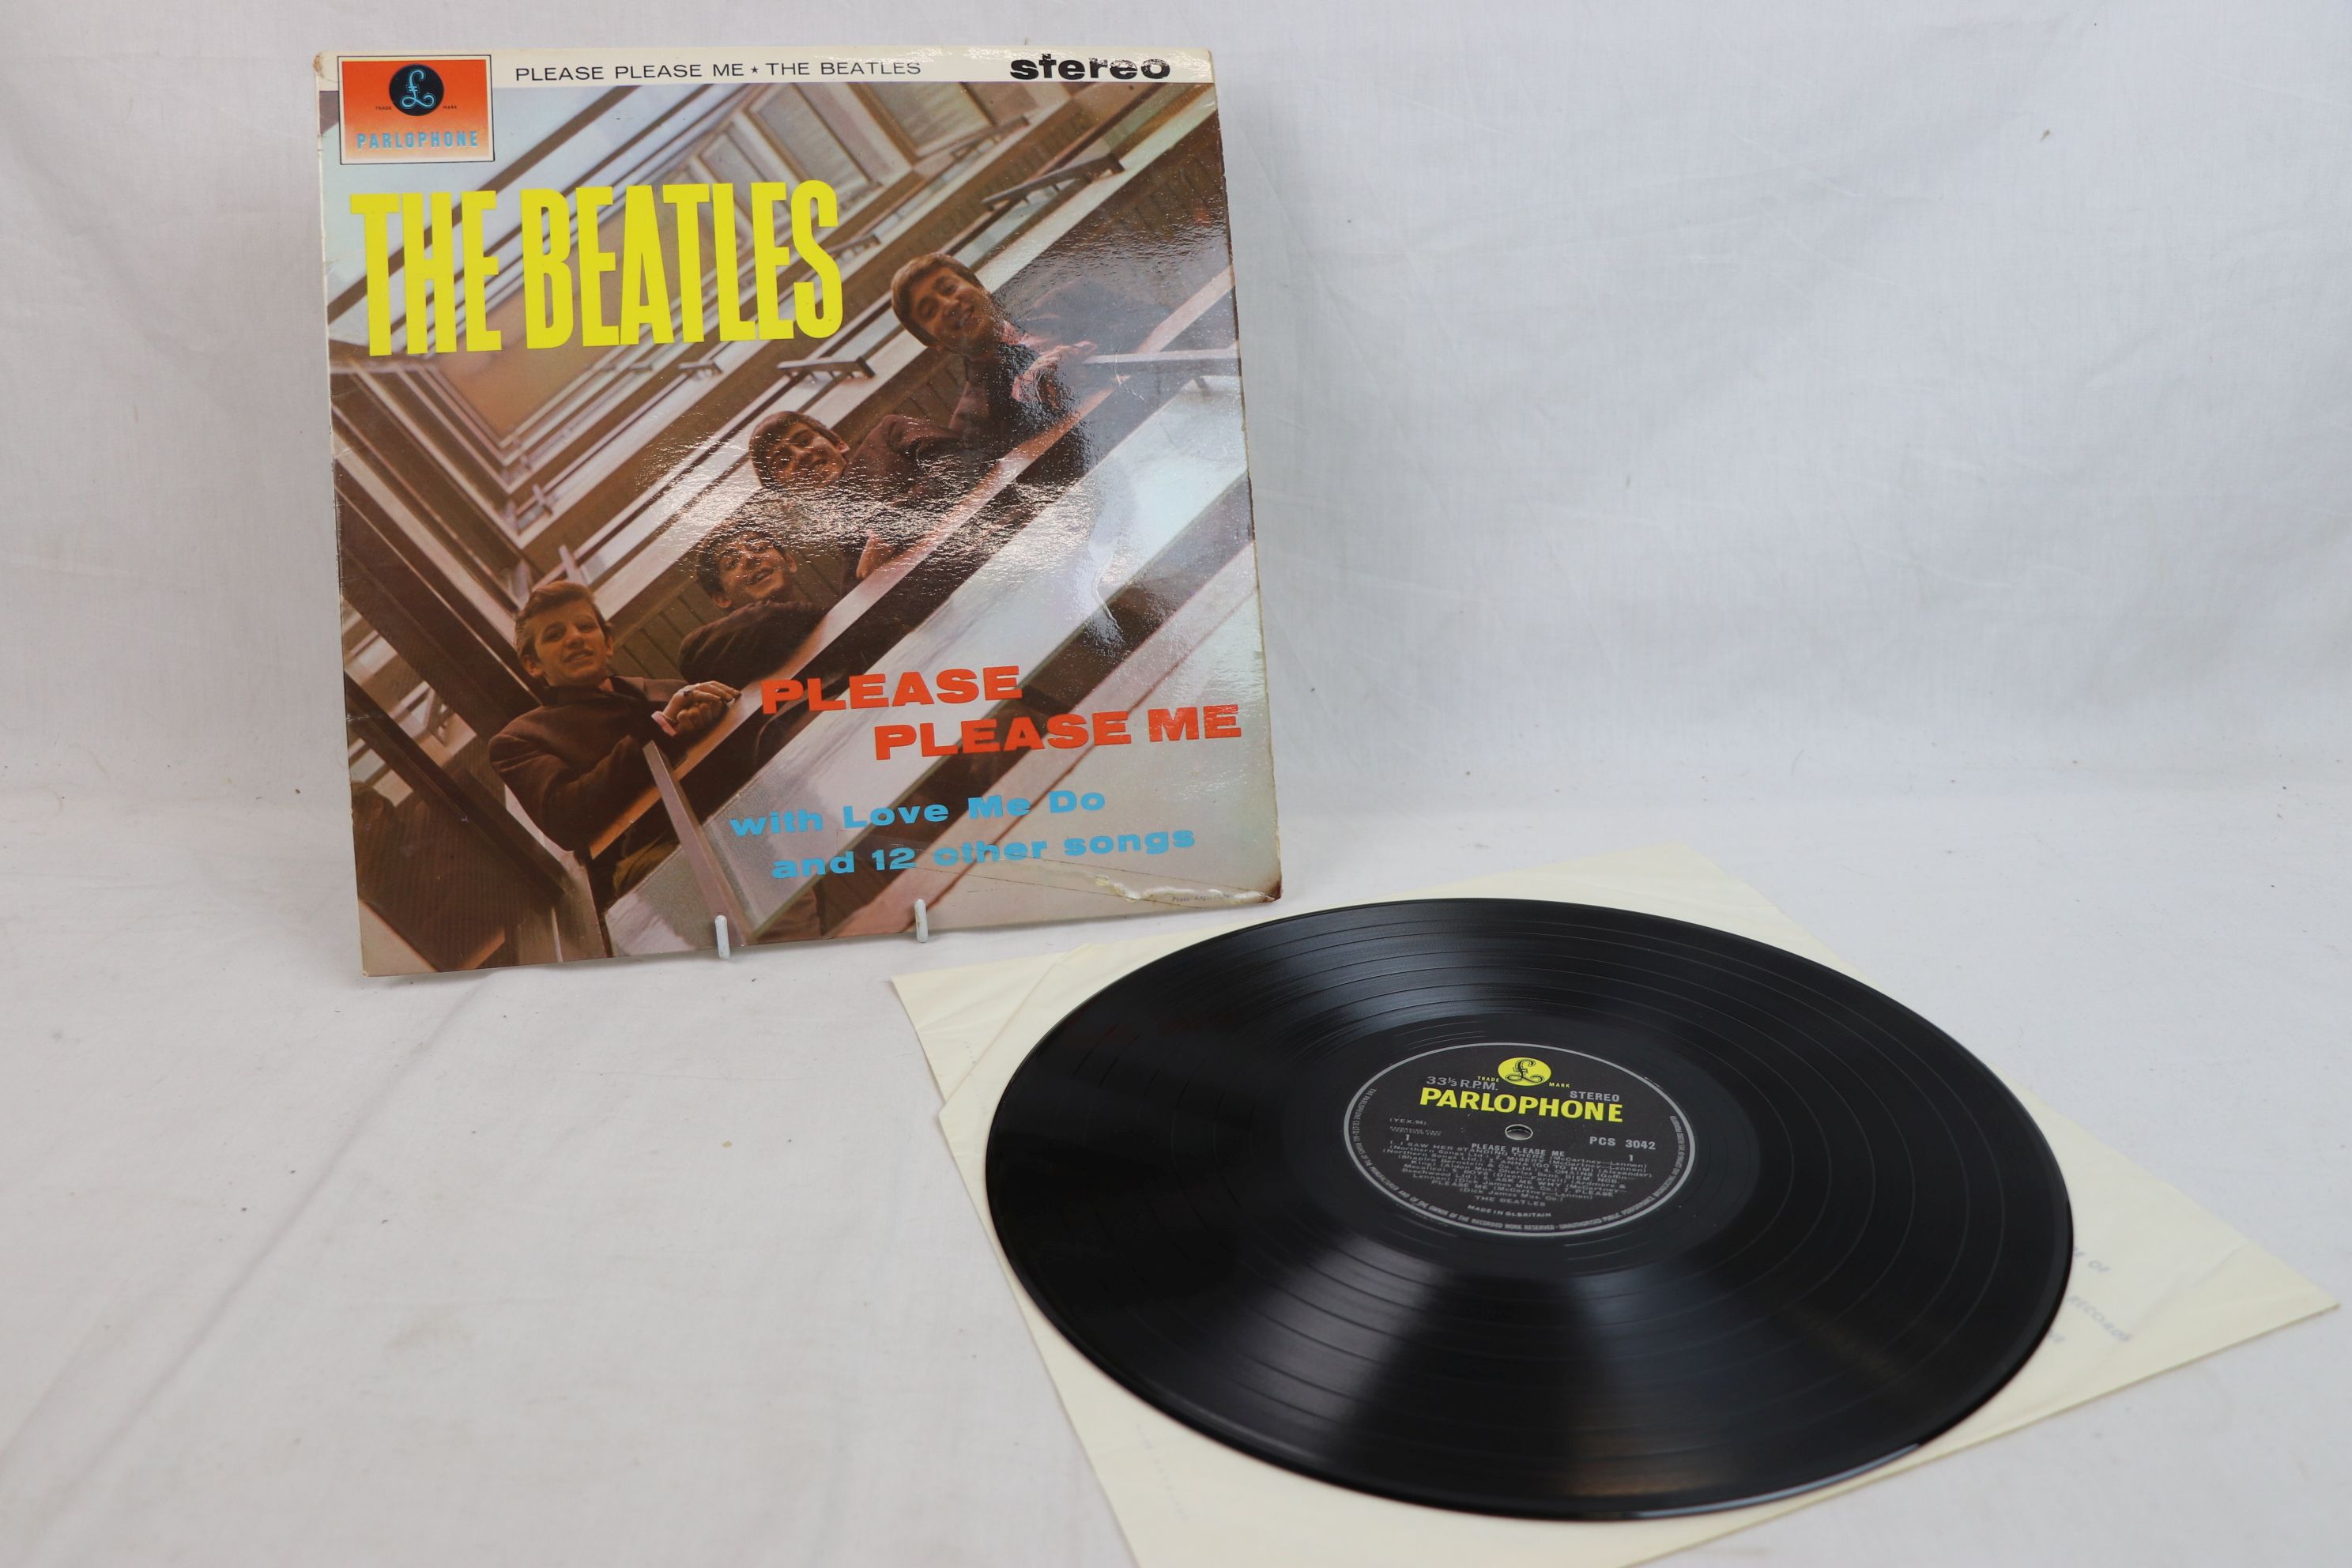 Vinyl - The Beatles Please Please Me PCS3042 yellow and black label, stereo, 33 1/3 rpm to label, - Image 3 of 10